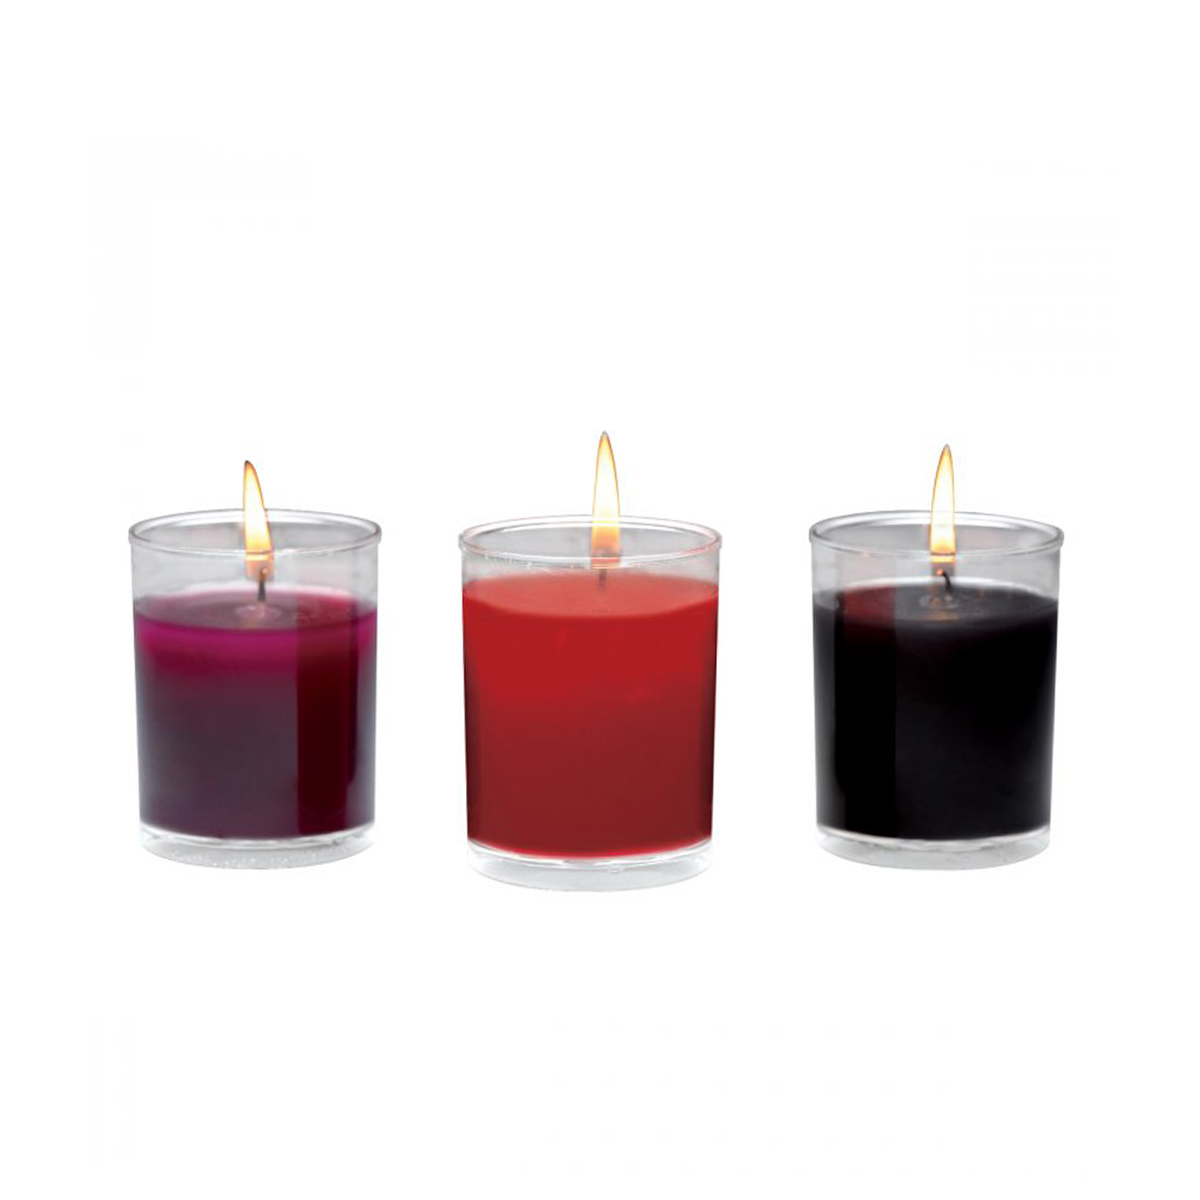 Flame-Drippers-Candle-Set-Designed-for-Wax-Play-118-XR-AG652-1